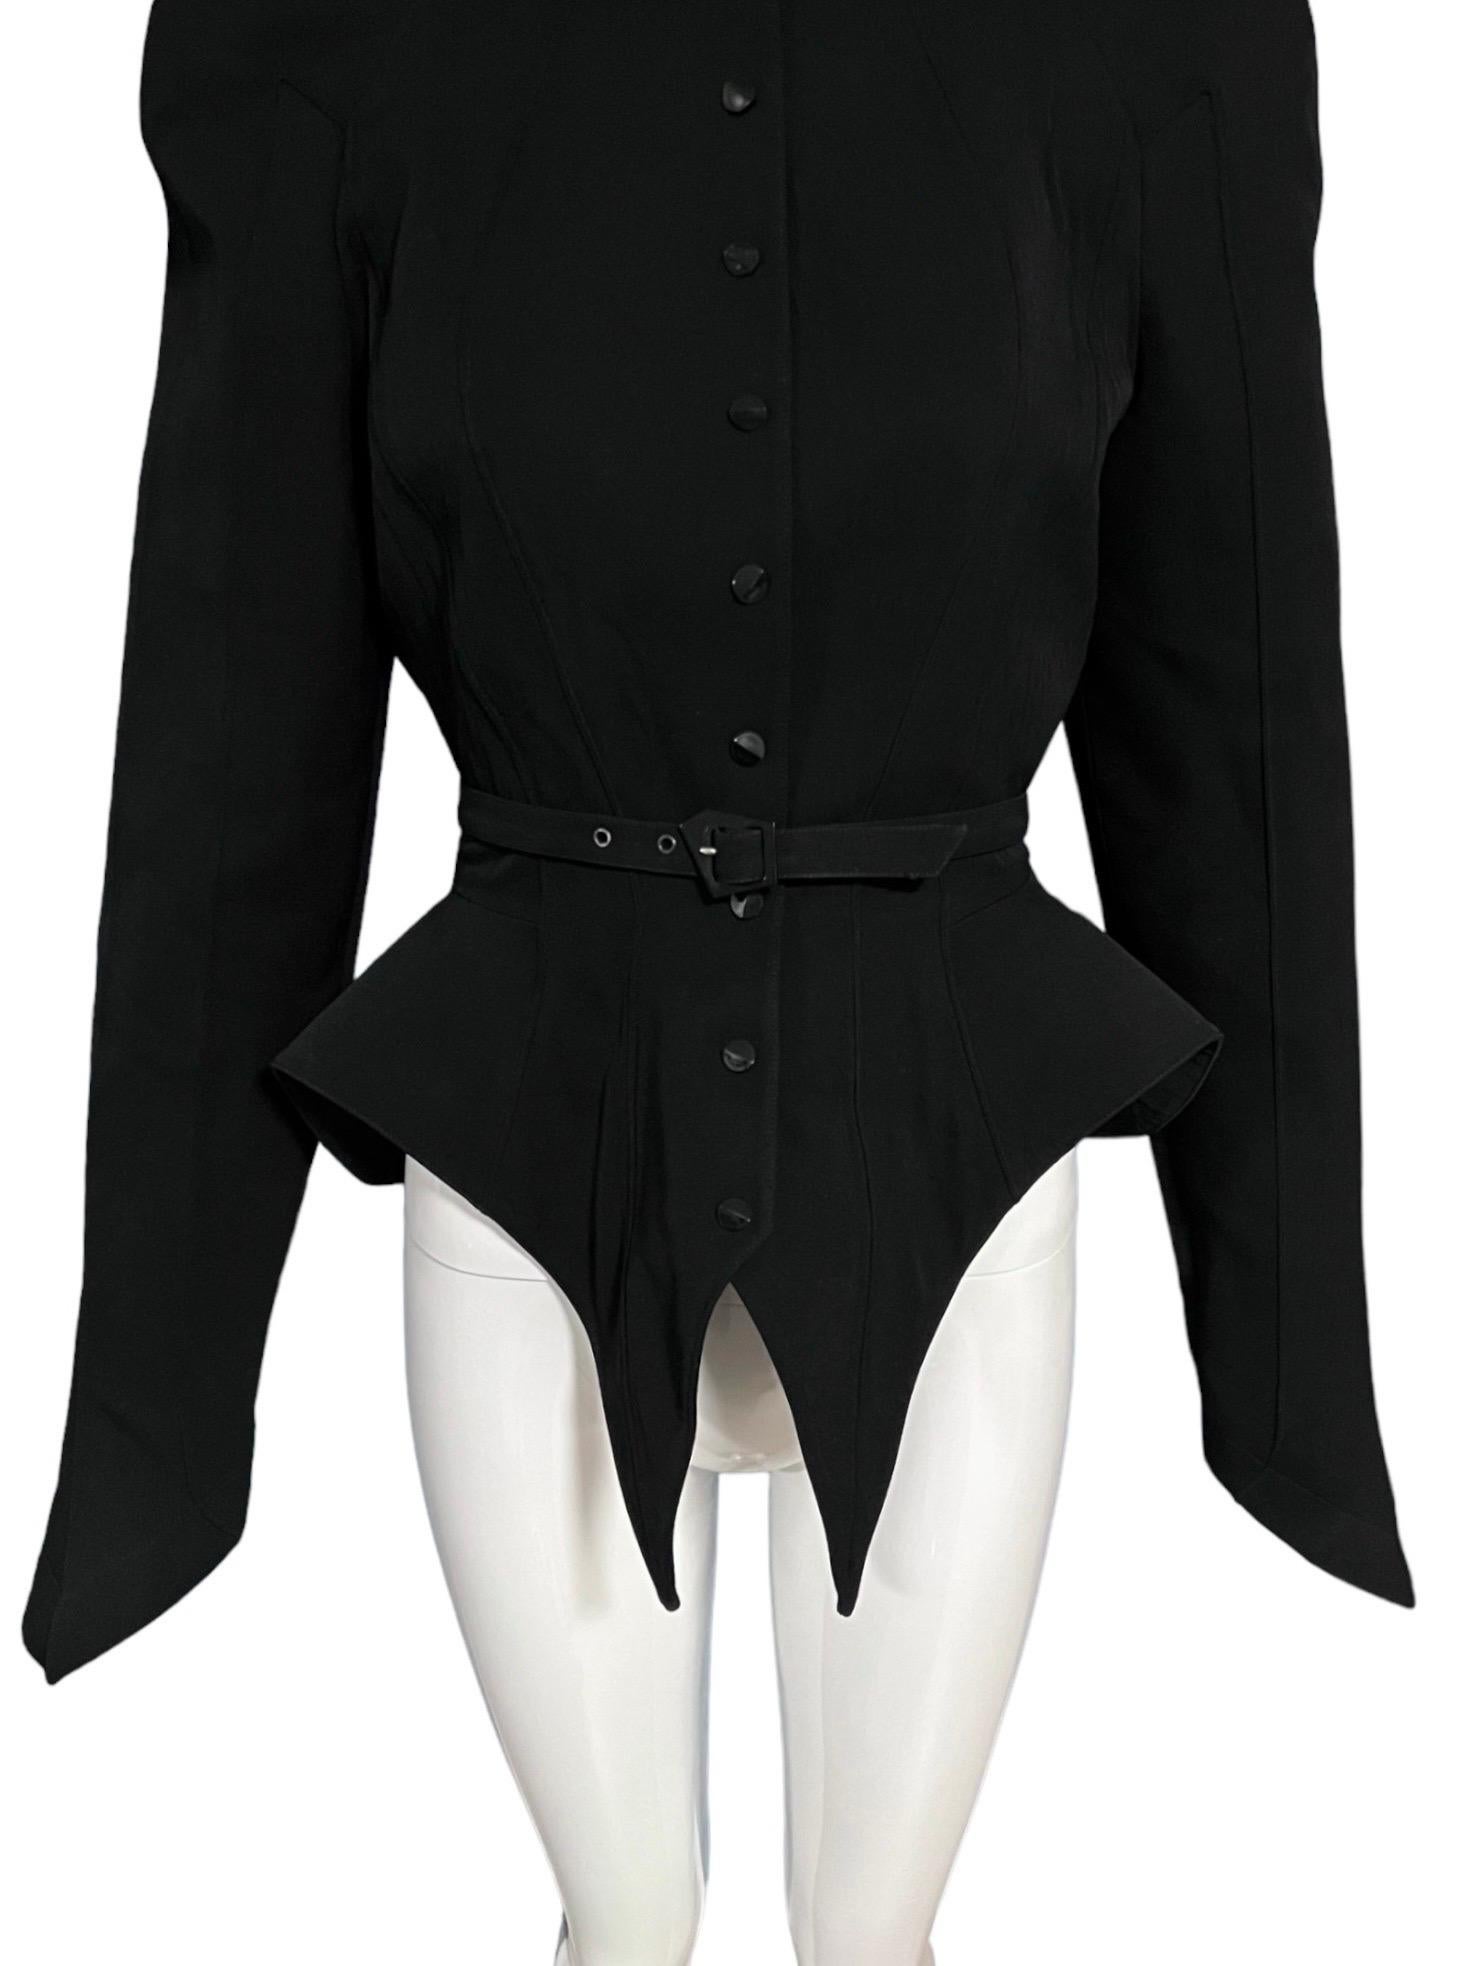 F/W 1988 Thierry Mugler Black Les Infernales Structural Runway Jacket For Sale 7